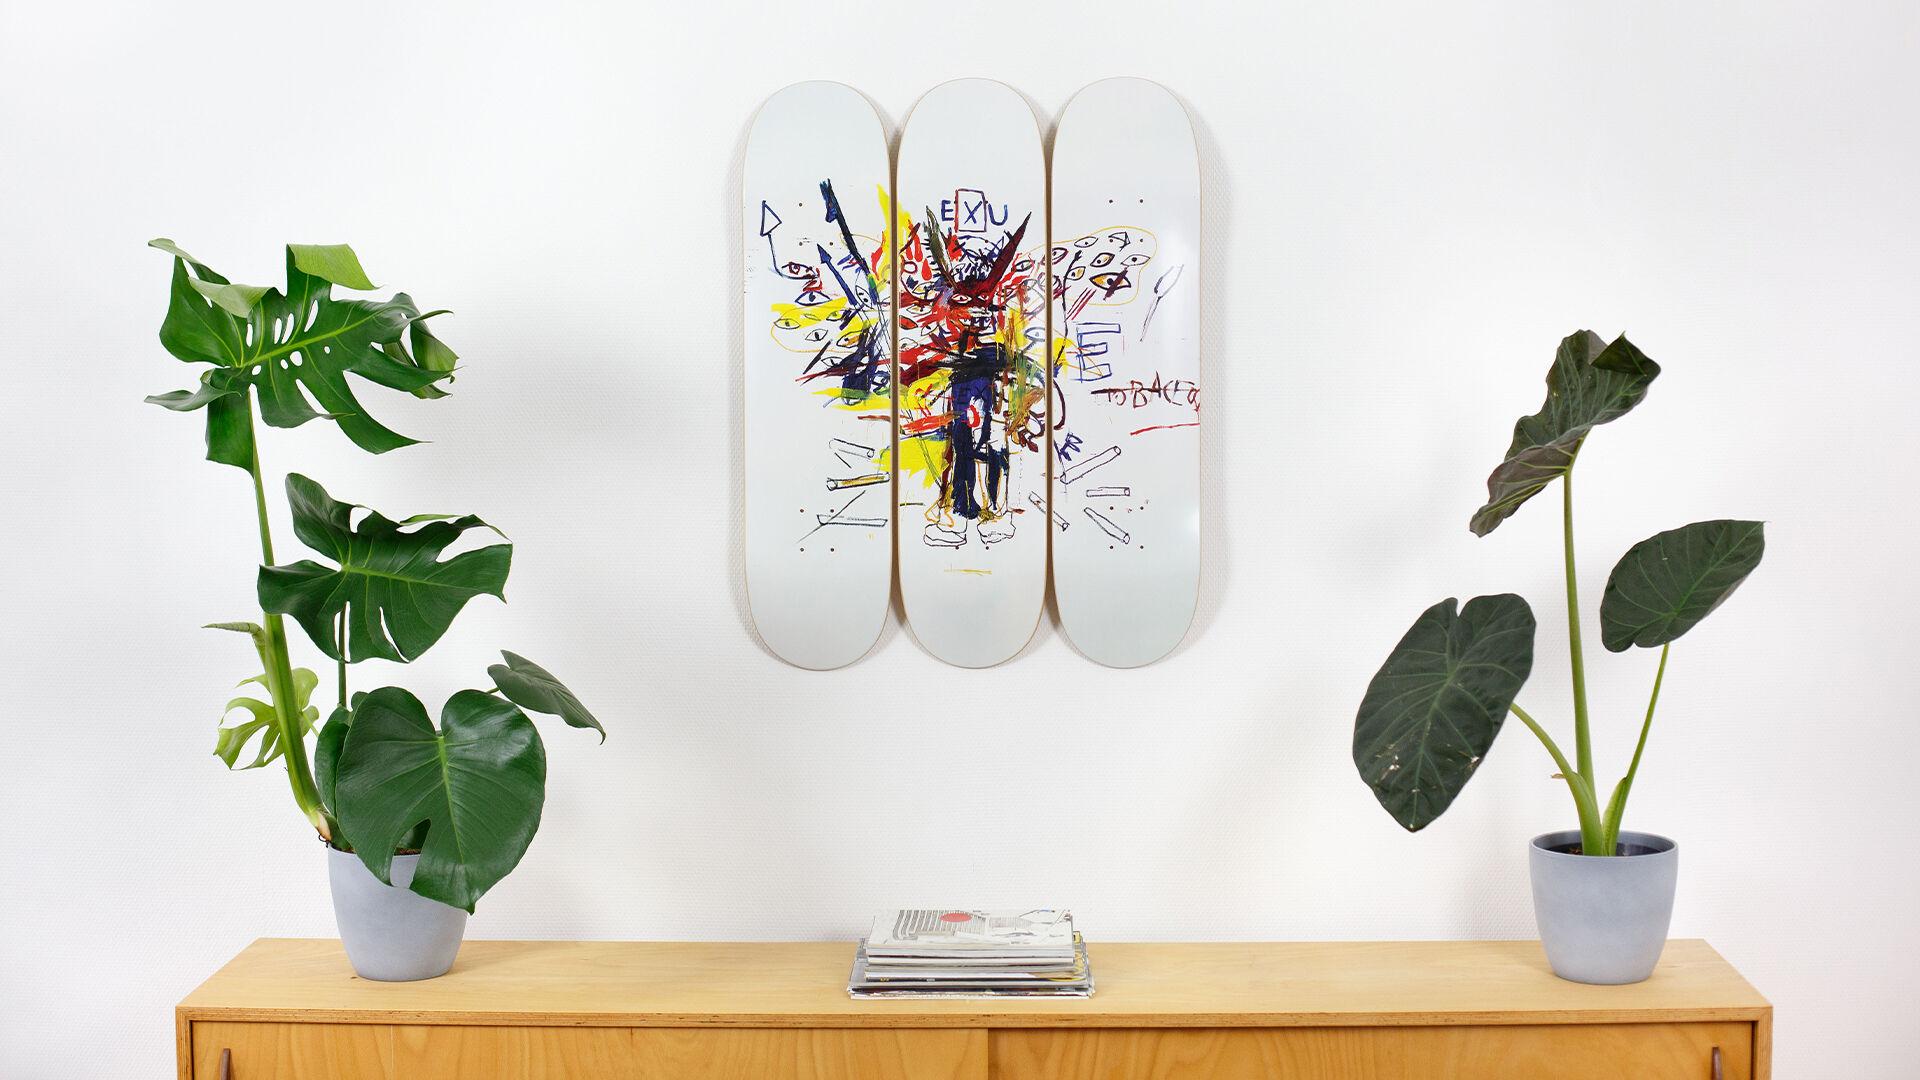 The Skateroom w/ Jean-Michel Basquiat Estate
Based on Exu, 1988.
Set of three skateboard decks.
7-Ply Canadian Maplewood with screen-print
Each deck: 31 H x 8 inches,
installed dimensions: approx. 31 H x 26 inches.
Mounting hardware